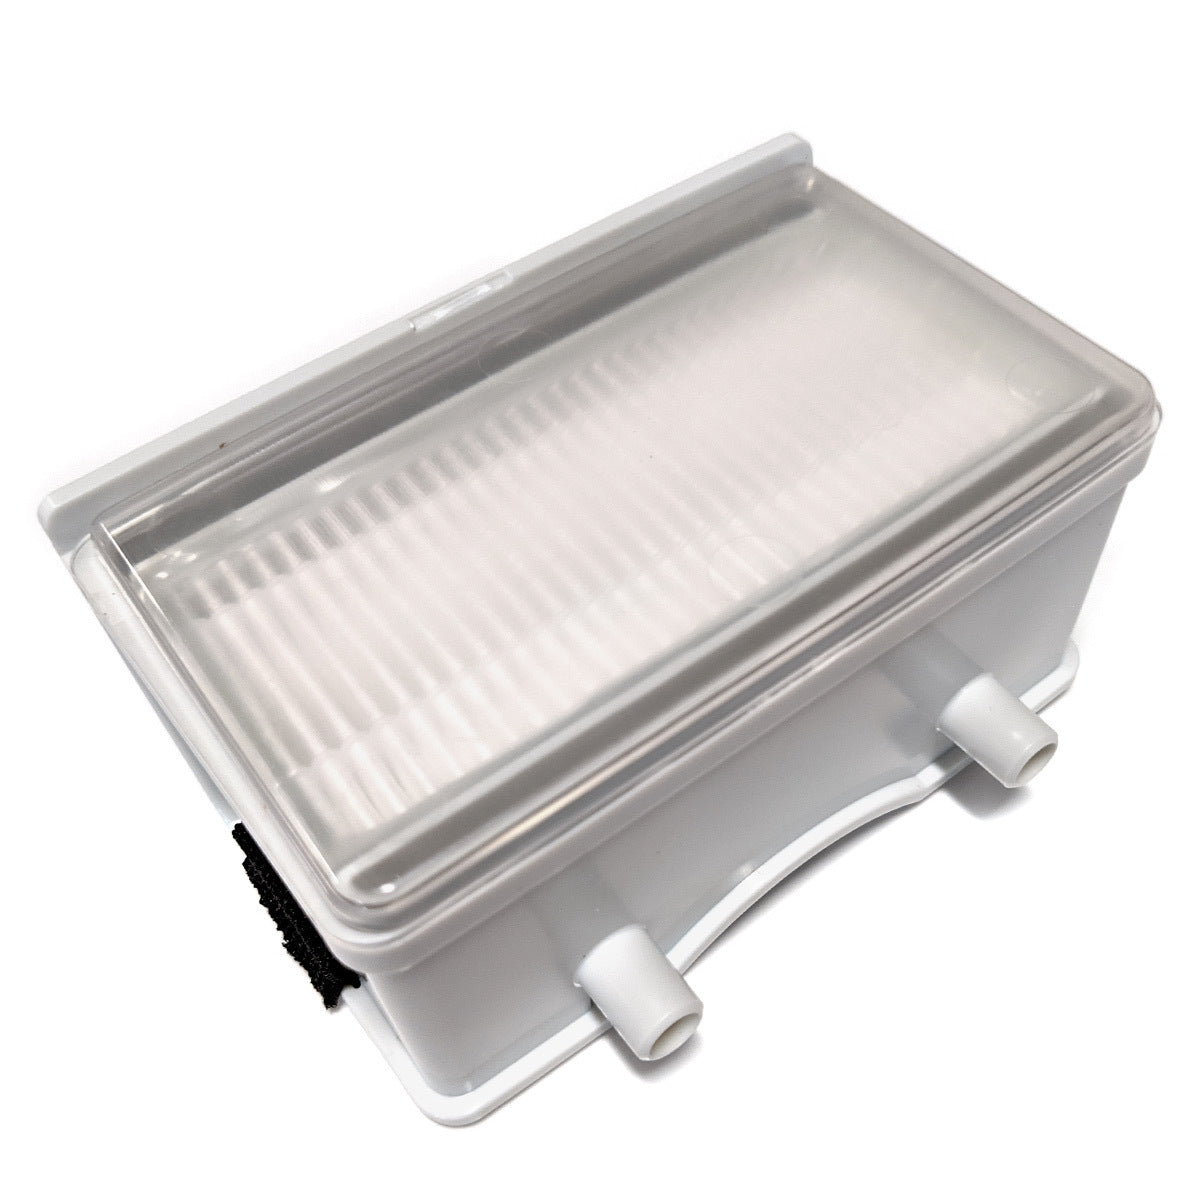 Air Inlet Filter for Inogen at Home Oxygen Concentrators